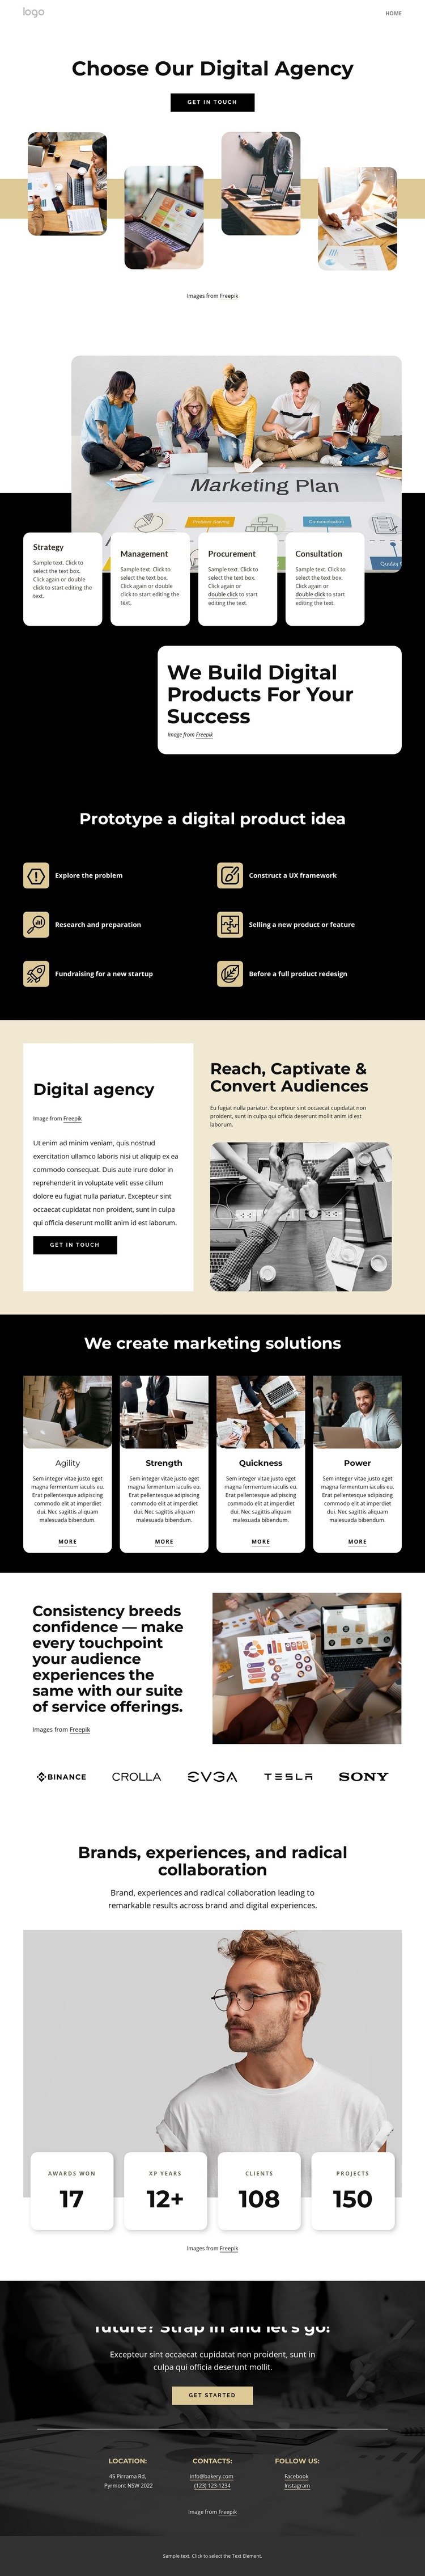 Choose our digital agency HTML5 Template